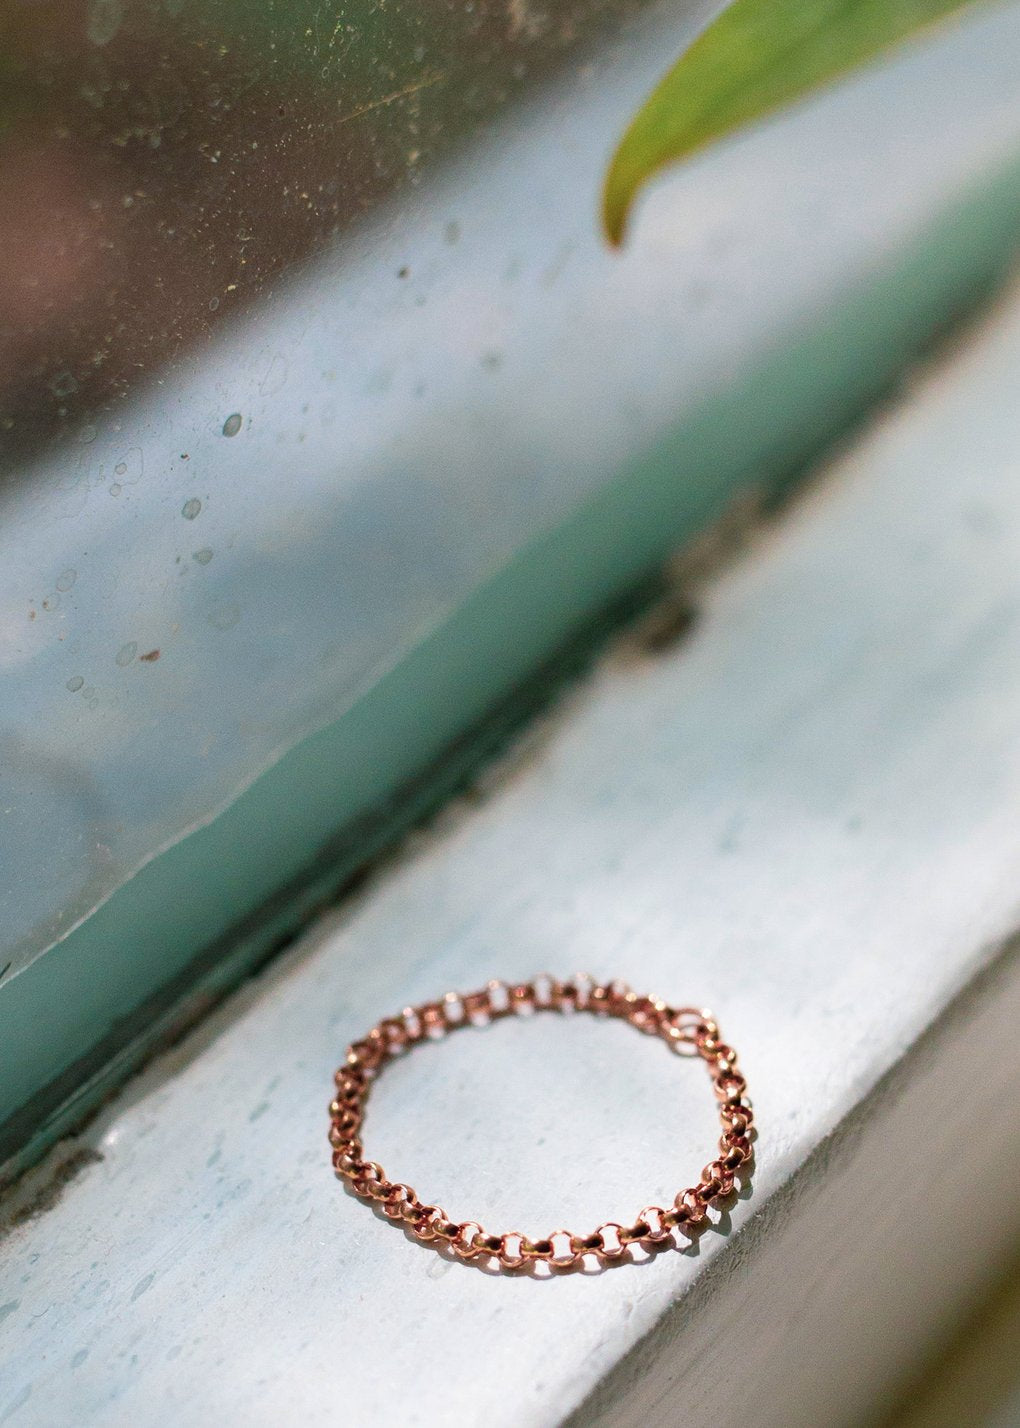 Disparate Youth Chain Ring in 14k Rose Gold